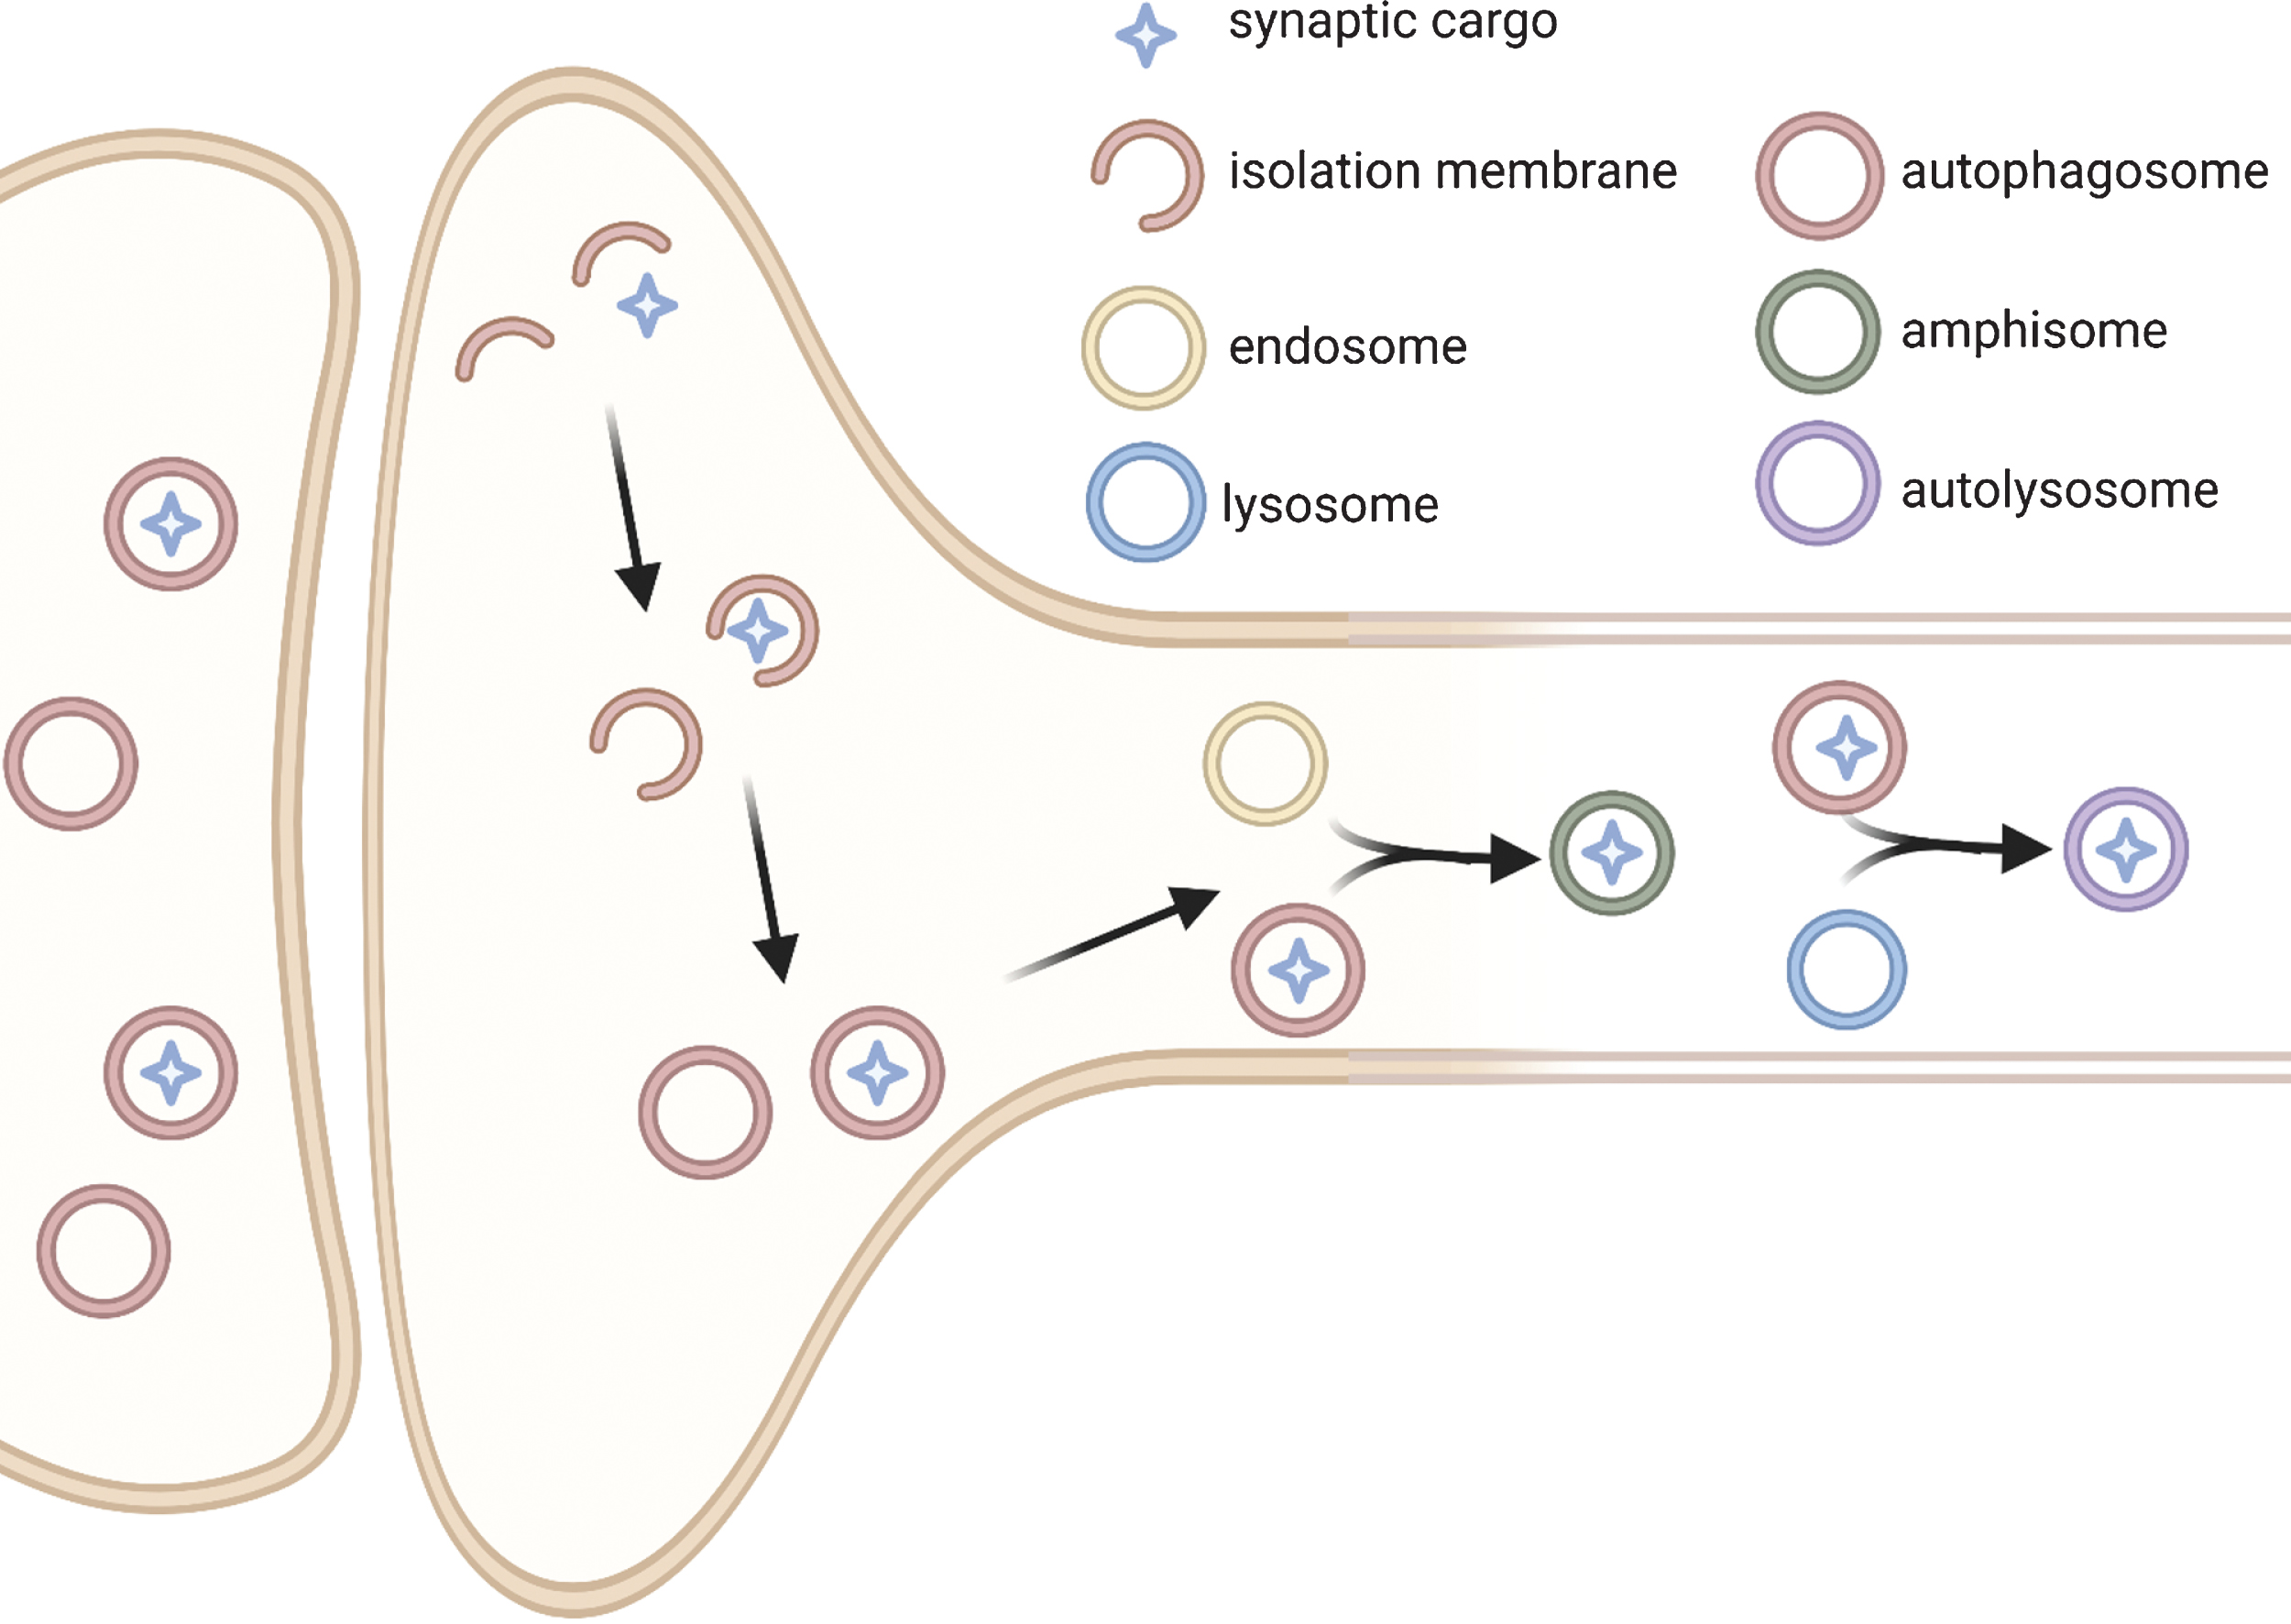 Simplified schematic of autophagy at the synapse. It has been suggested that pre-synaptically, autophagosome formation is initiated at the synapse by the generation of an isolation membranes that then close to become autophagosomes. These structures then mature as they travel retrogradely up the axon prior to fusing with lysosomes in the cell body [93–100]. The molecular players governing this pathway are still being investigated but may include the proteins Rab-interacting lysosomal protein (RILP) [138] and Endophilin A [94]. Autophagy has been implicated in the processing of various synaptic proteins (see Table 2) and may be involved in the degradation of entire synaptic vesicles [86, 93]. It is unclear how those proteins and organelles are targeted to the autophagosome, but likely requires adaptor proteins such as p62 [106] and Rab26 [93]. The movement of autophagosomes in dendrites has been less thoroughly studied, although autophagy does seem to be playing a role in this compartment as well, as multiple post-synaptic proteins are also implicated as targets of autophagy (see Table 2). (Figure created with BioRender.com).